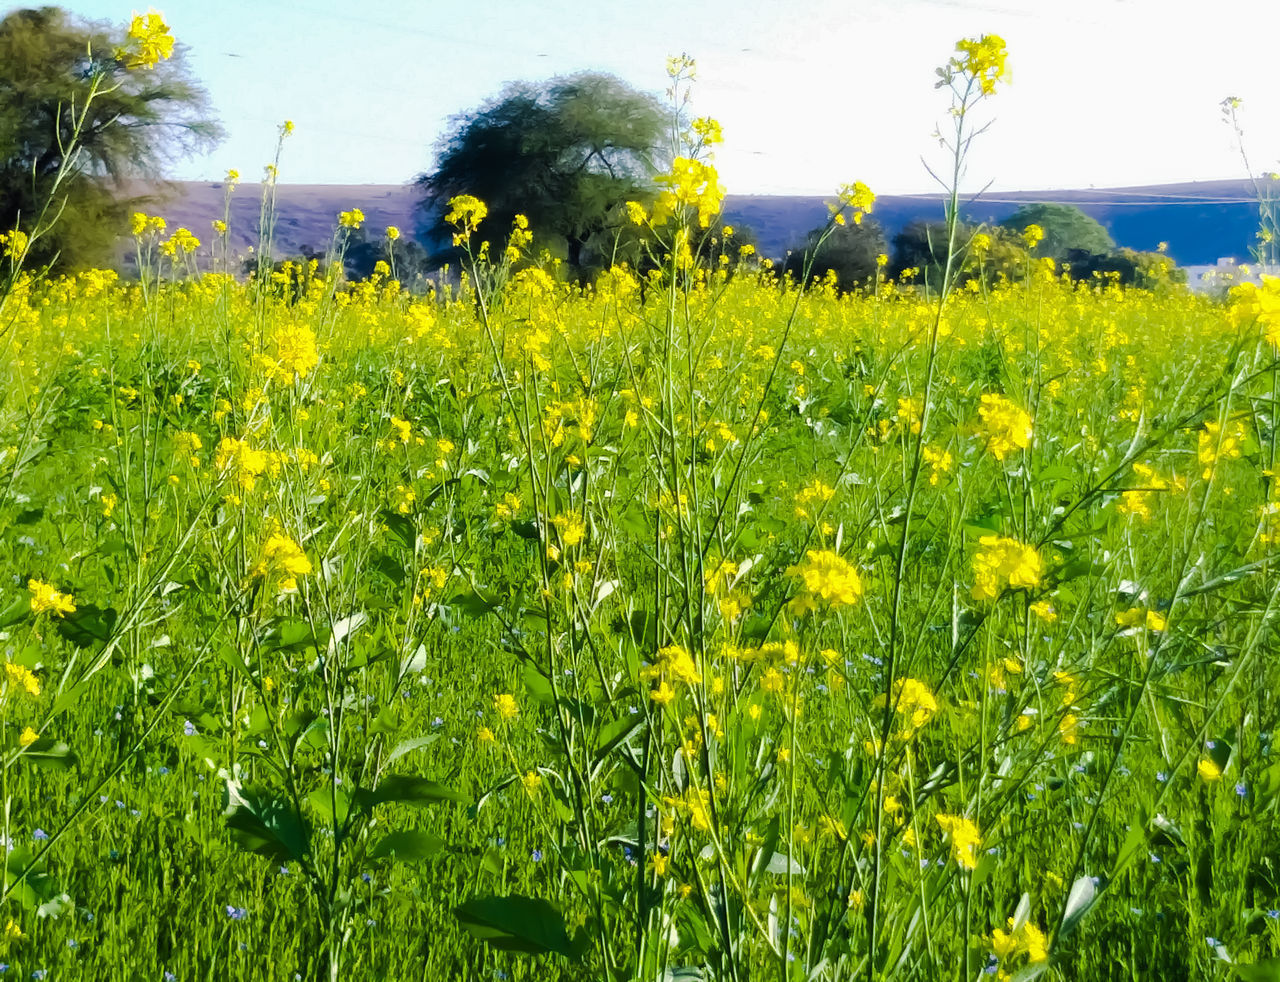 CLOSE-UP OF YELLOW FLOWERS GROWING ON FIELD